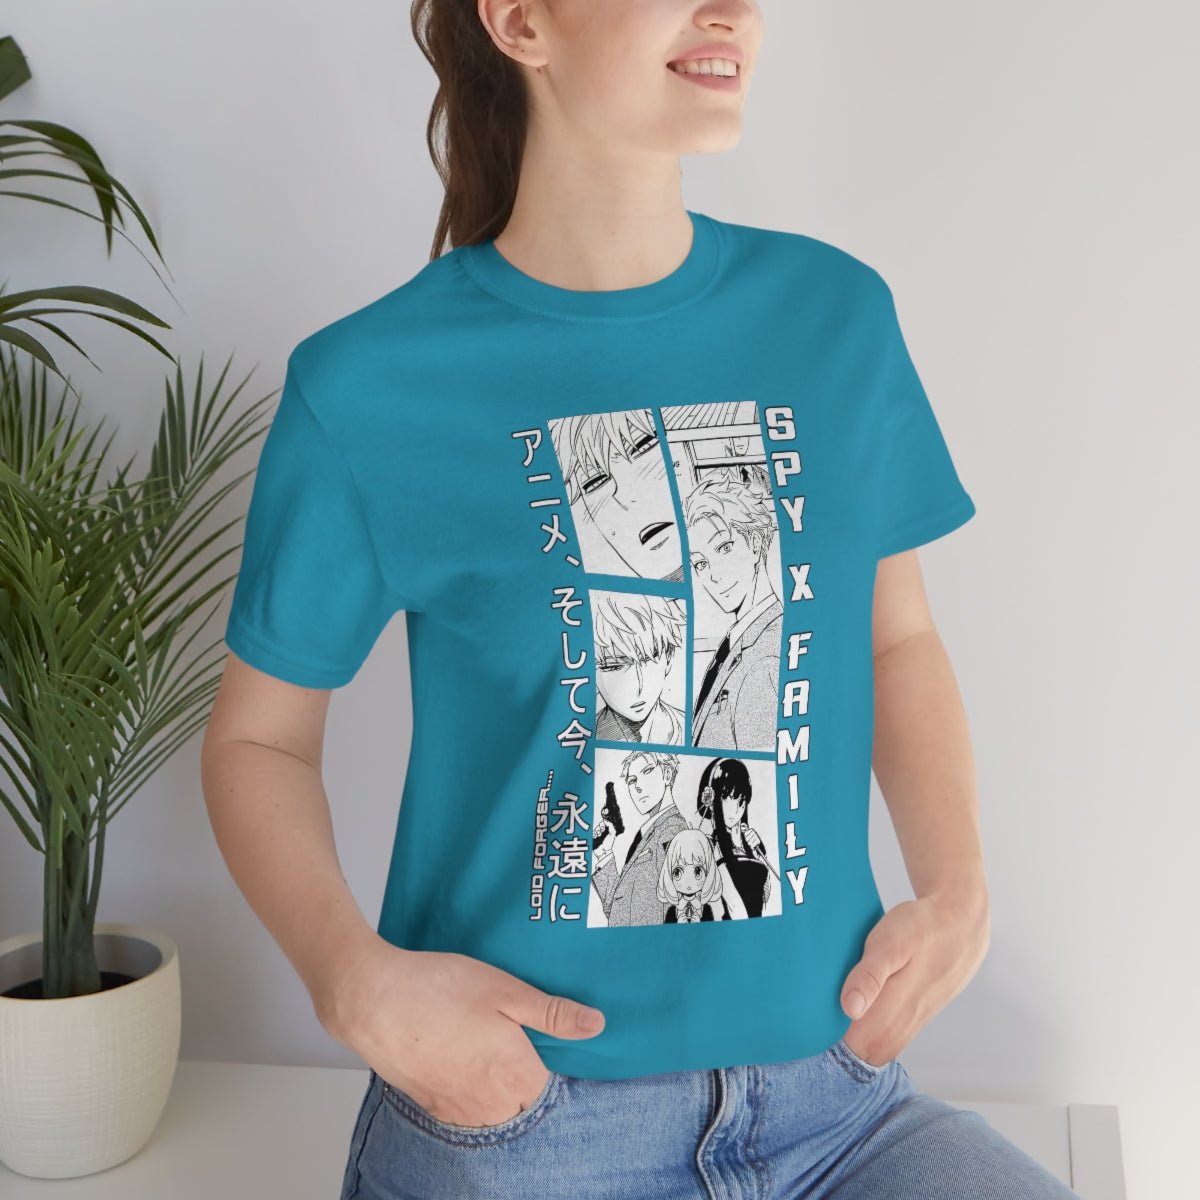 Loid Forger Spy x Family Anime Shirt - One Punch Fits